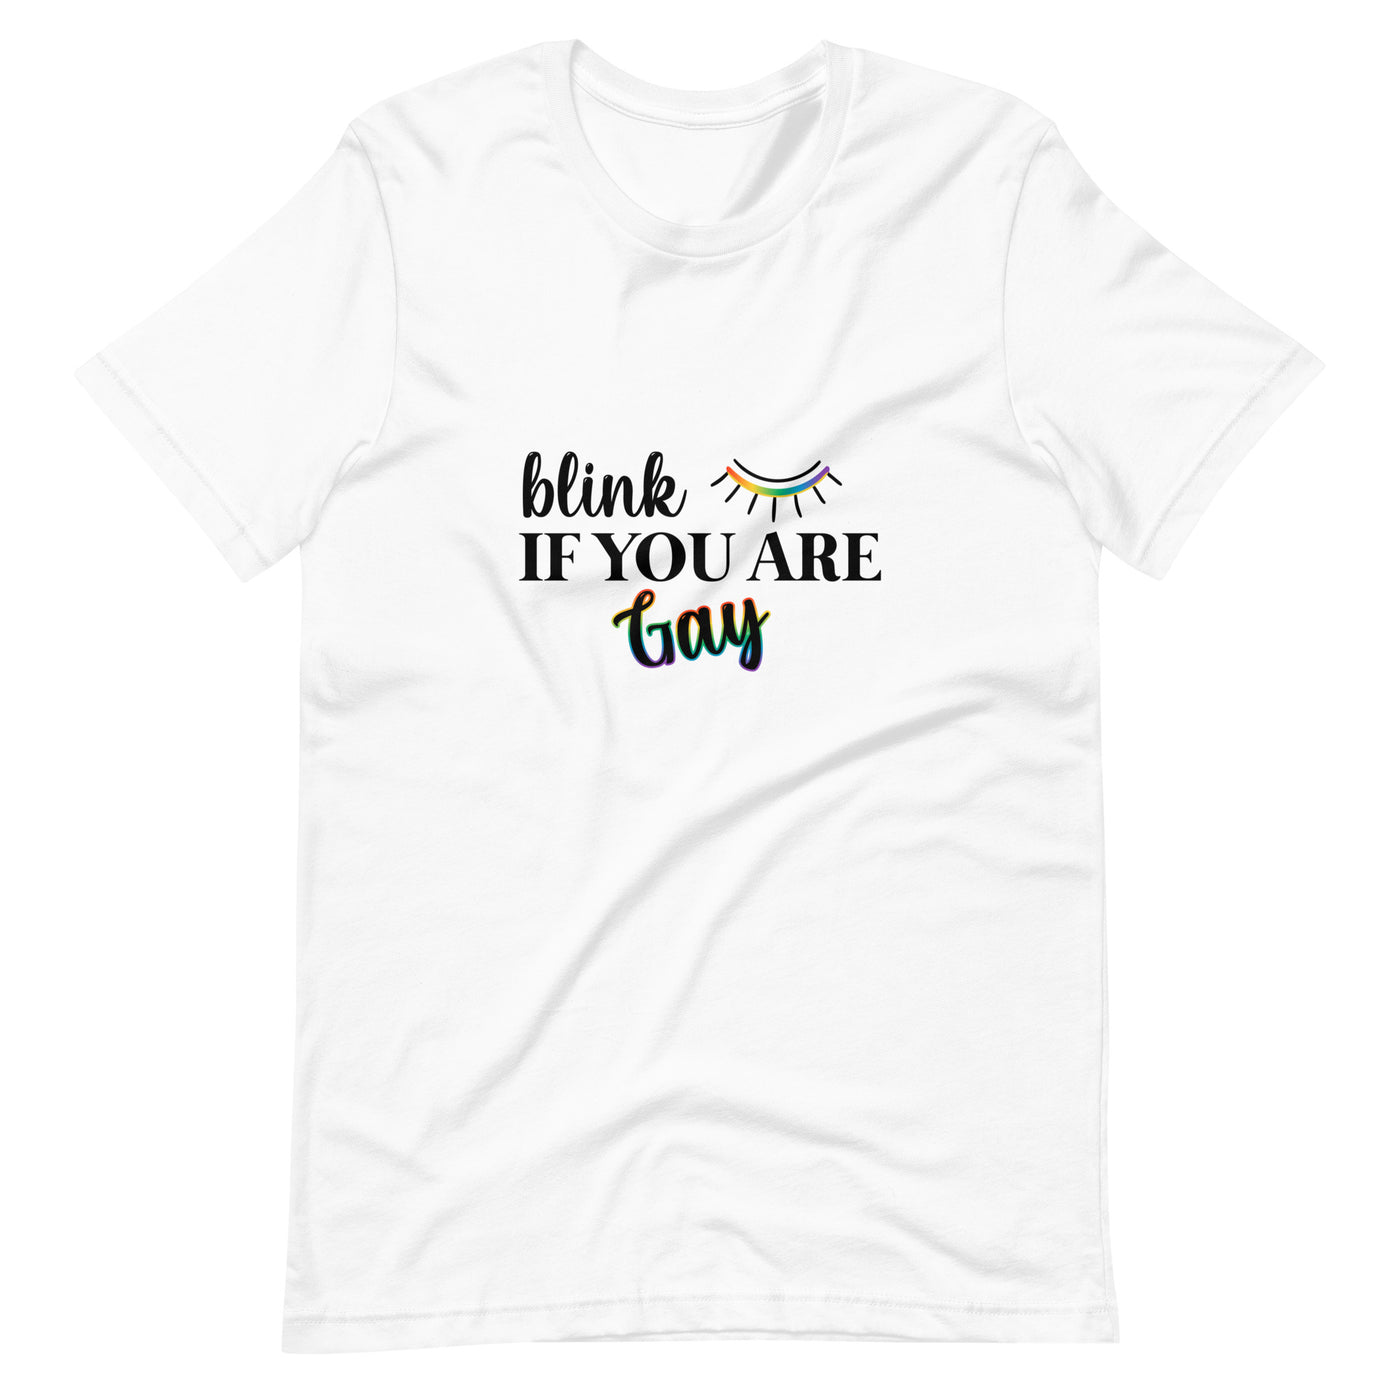 Pride Clothes - Slay Everyday Blink If You Are Gay Pride Tops TShirt - White